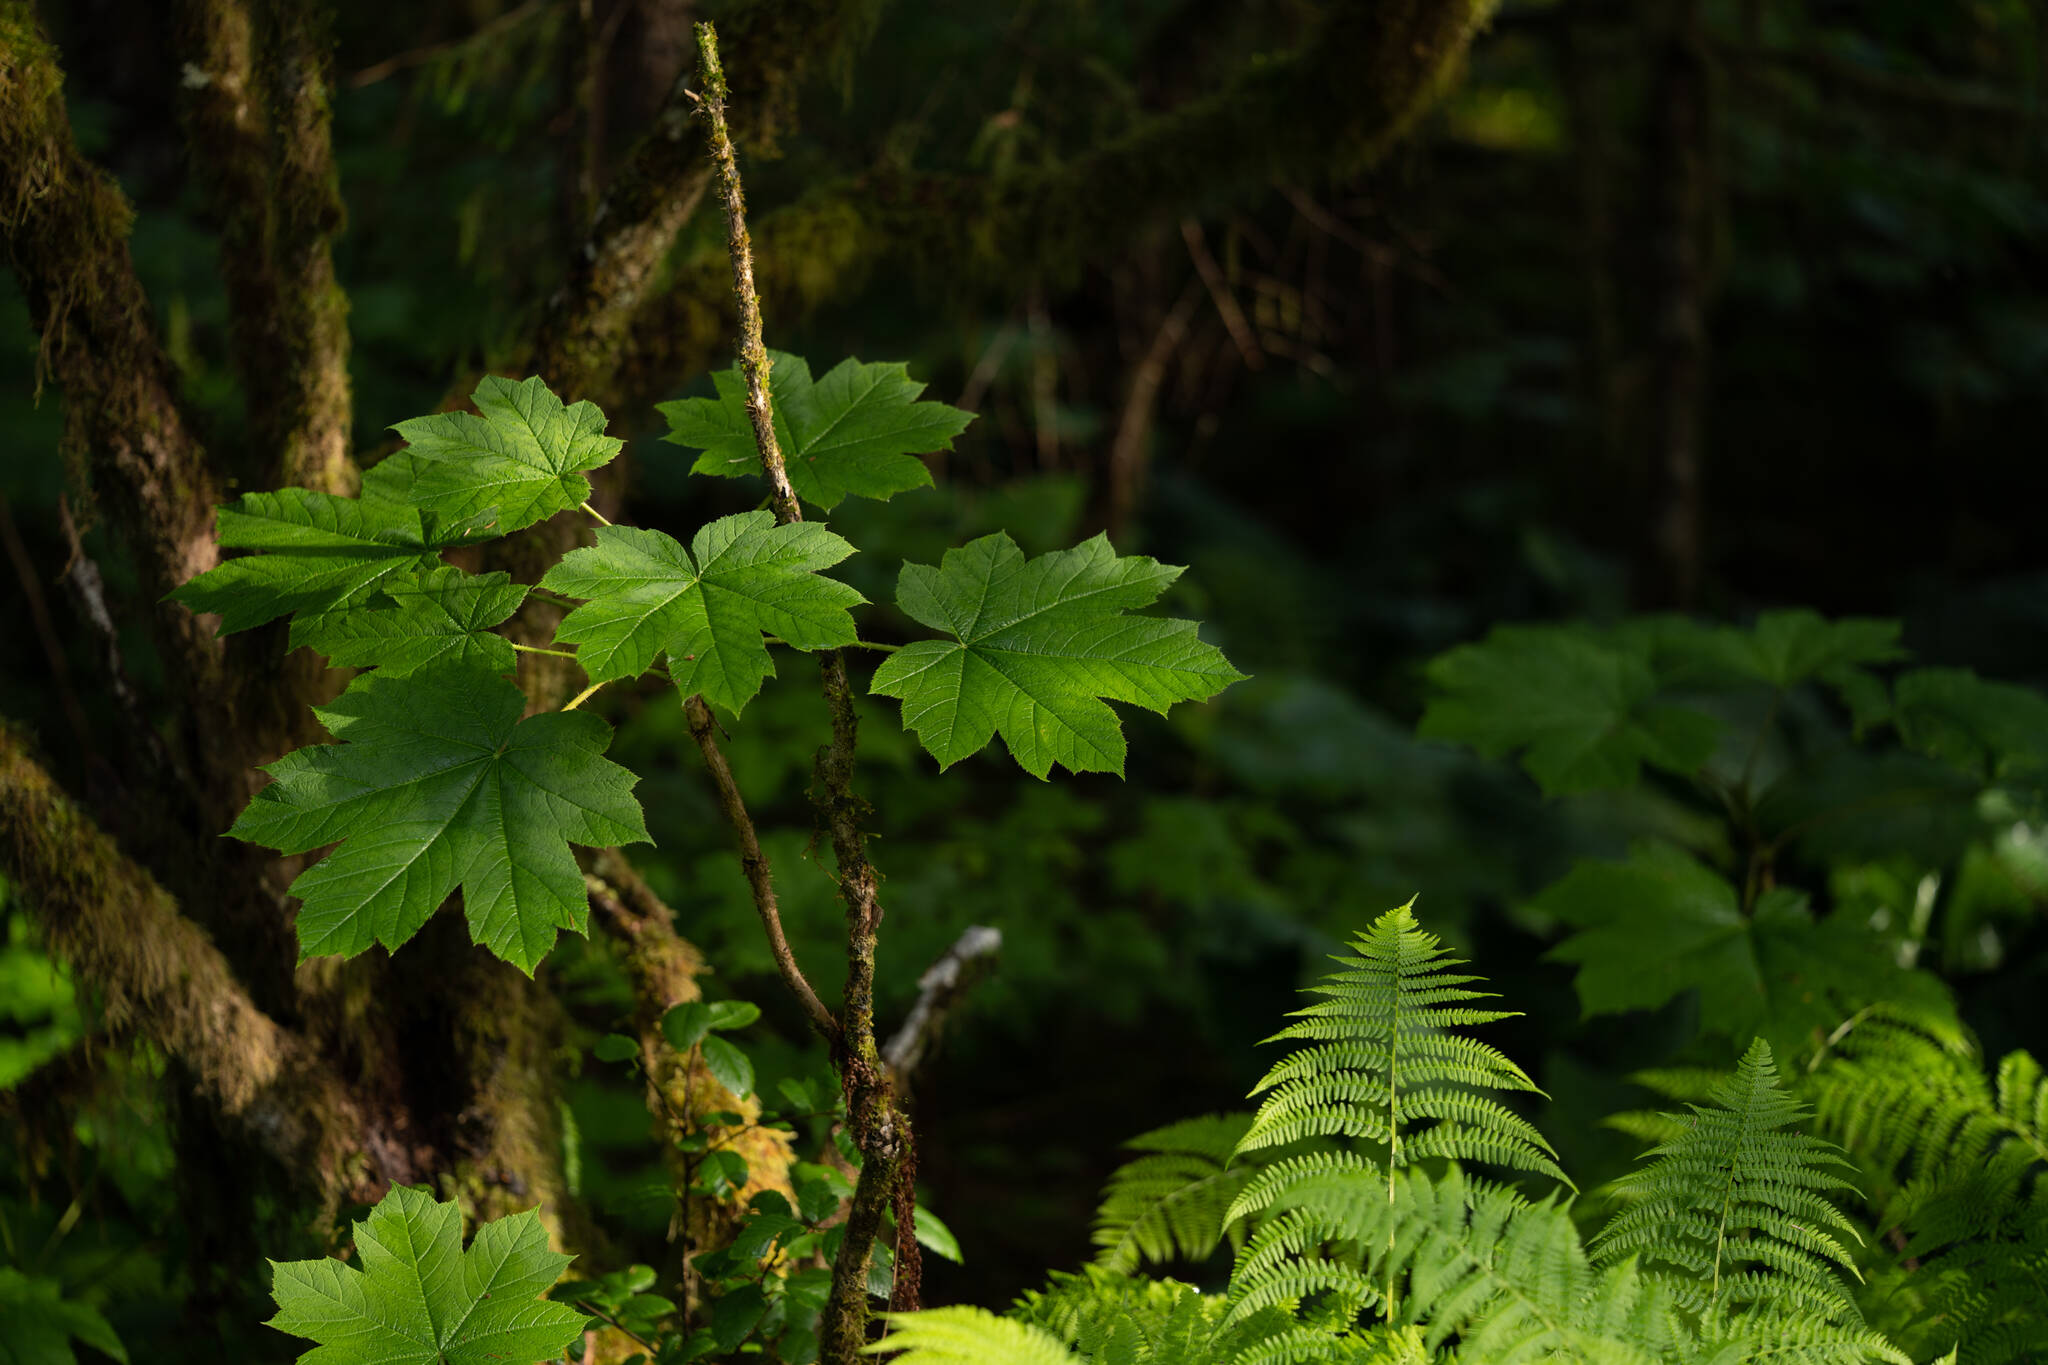 Like the forest that surrounds us, Southeast Alaska’s economy is complex, multilayered, and interconnected. (Courtesy Photo /Bethany Goodrich)